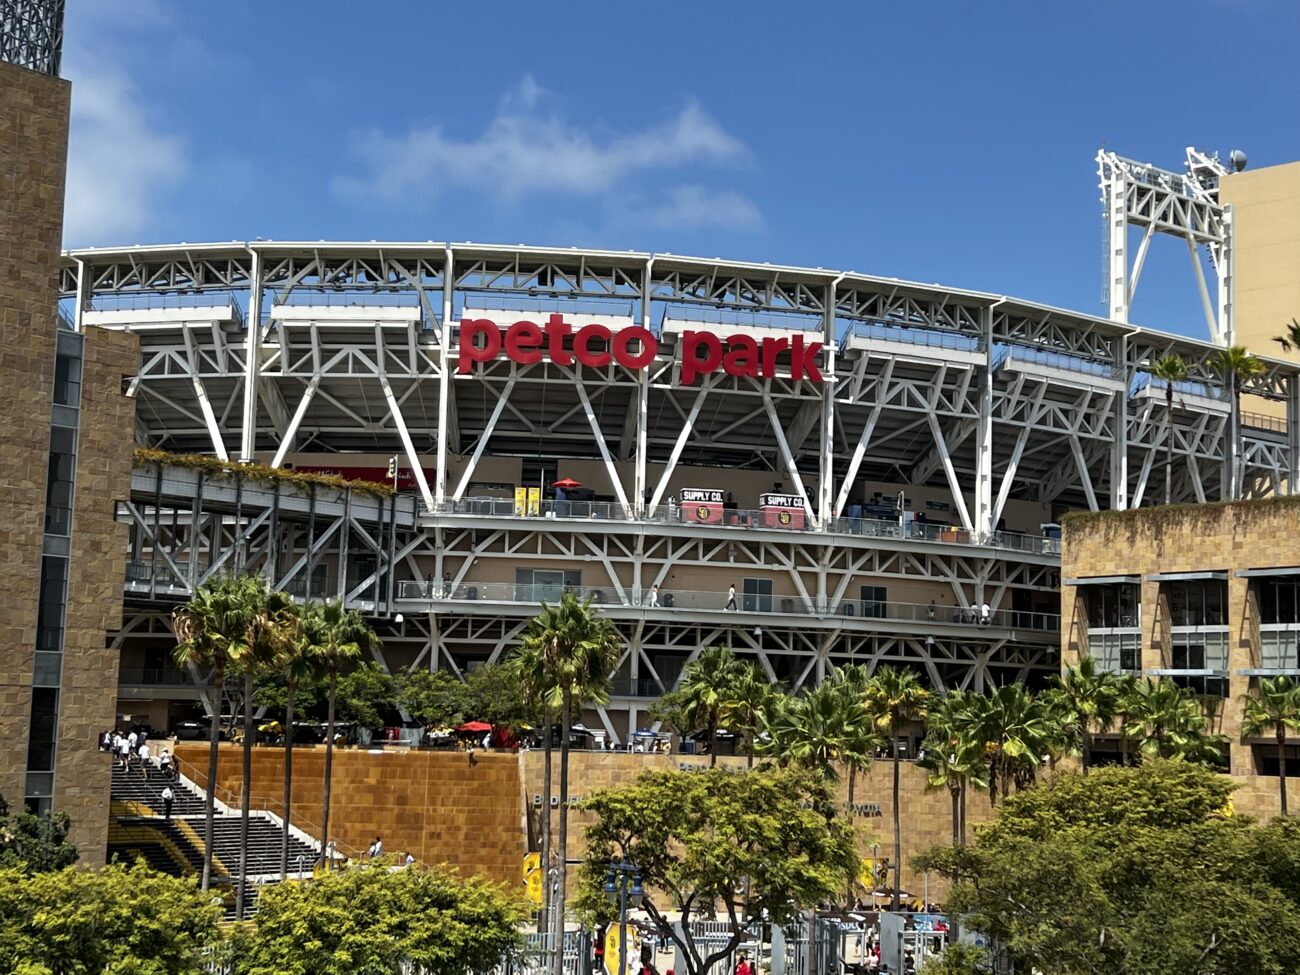 San Diego Behind-The-Scenes at Petco Park Tour 2023